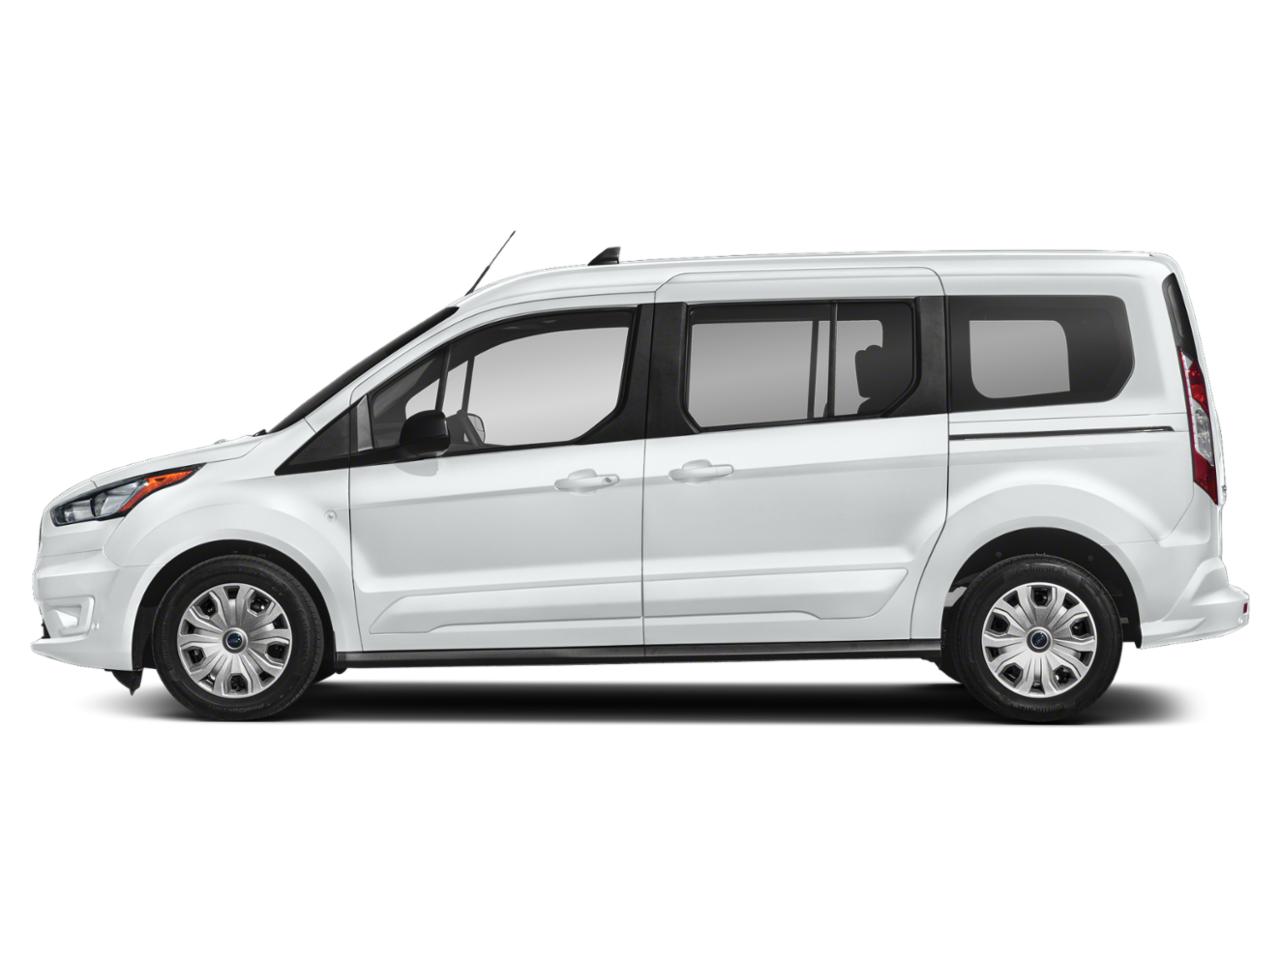 2019 Ford Transit Connect Wagon Vehicle Photo in GREELEY, CO 80634-4125